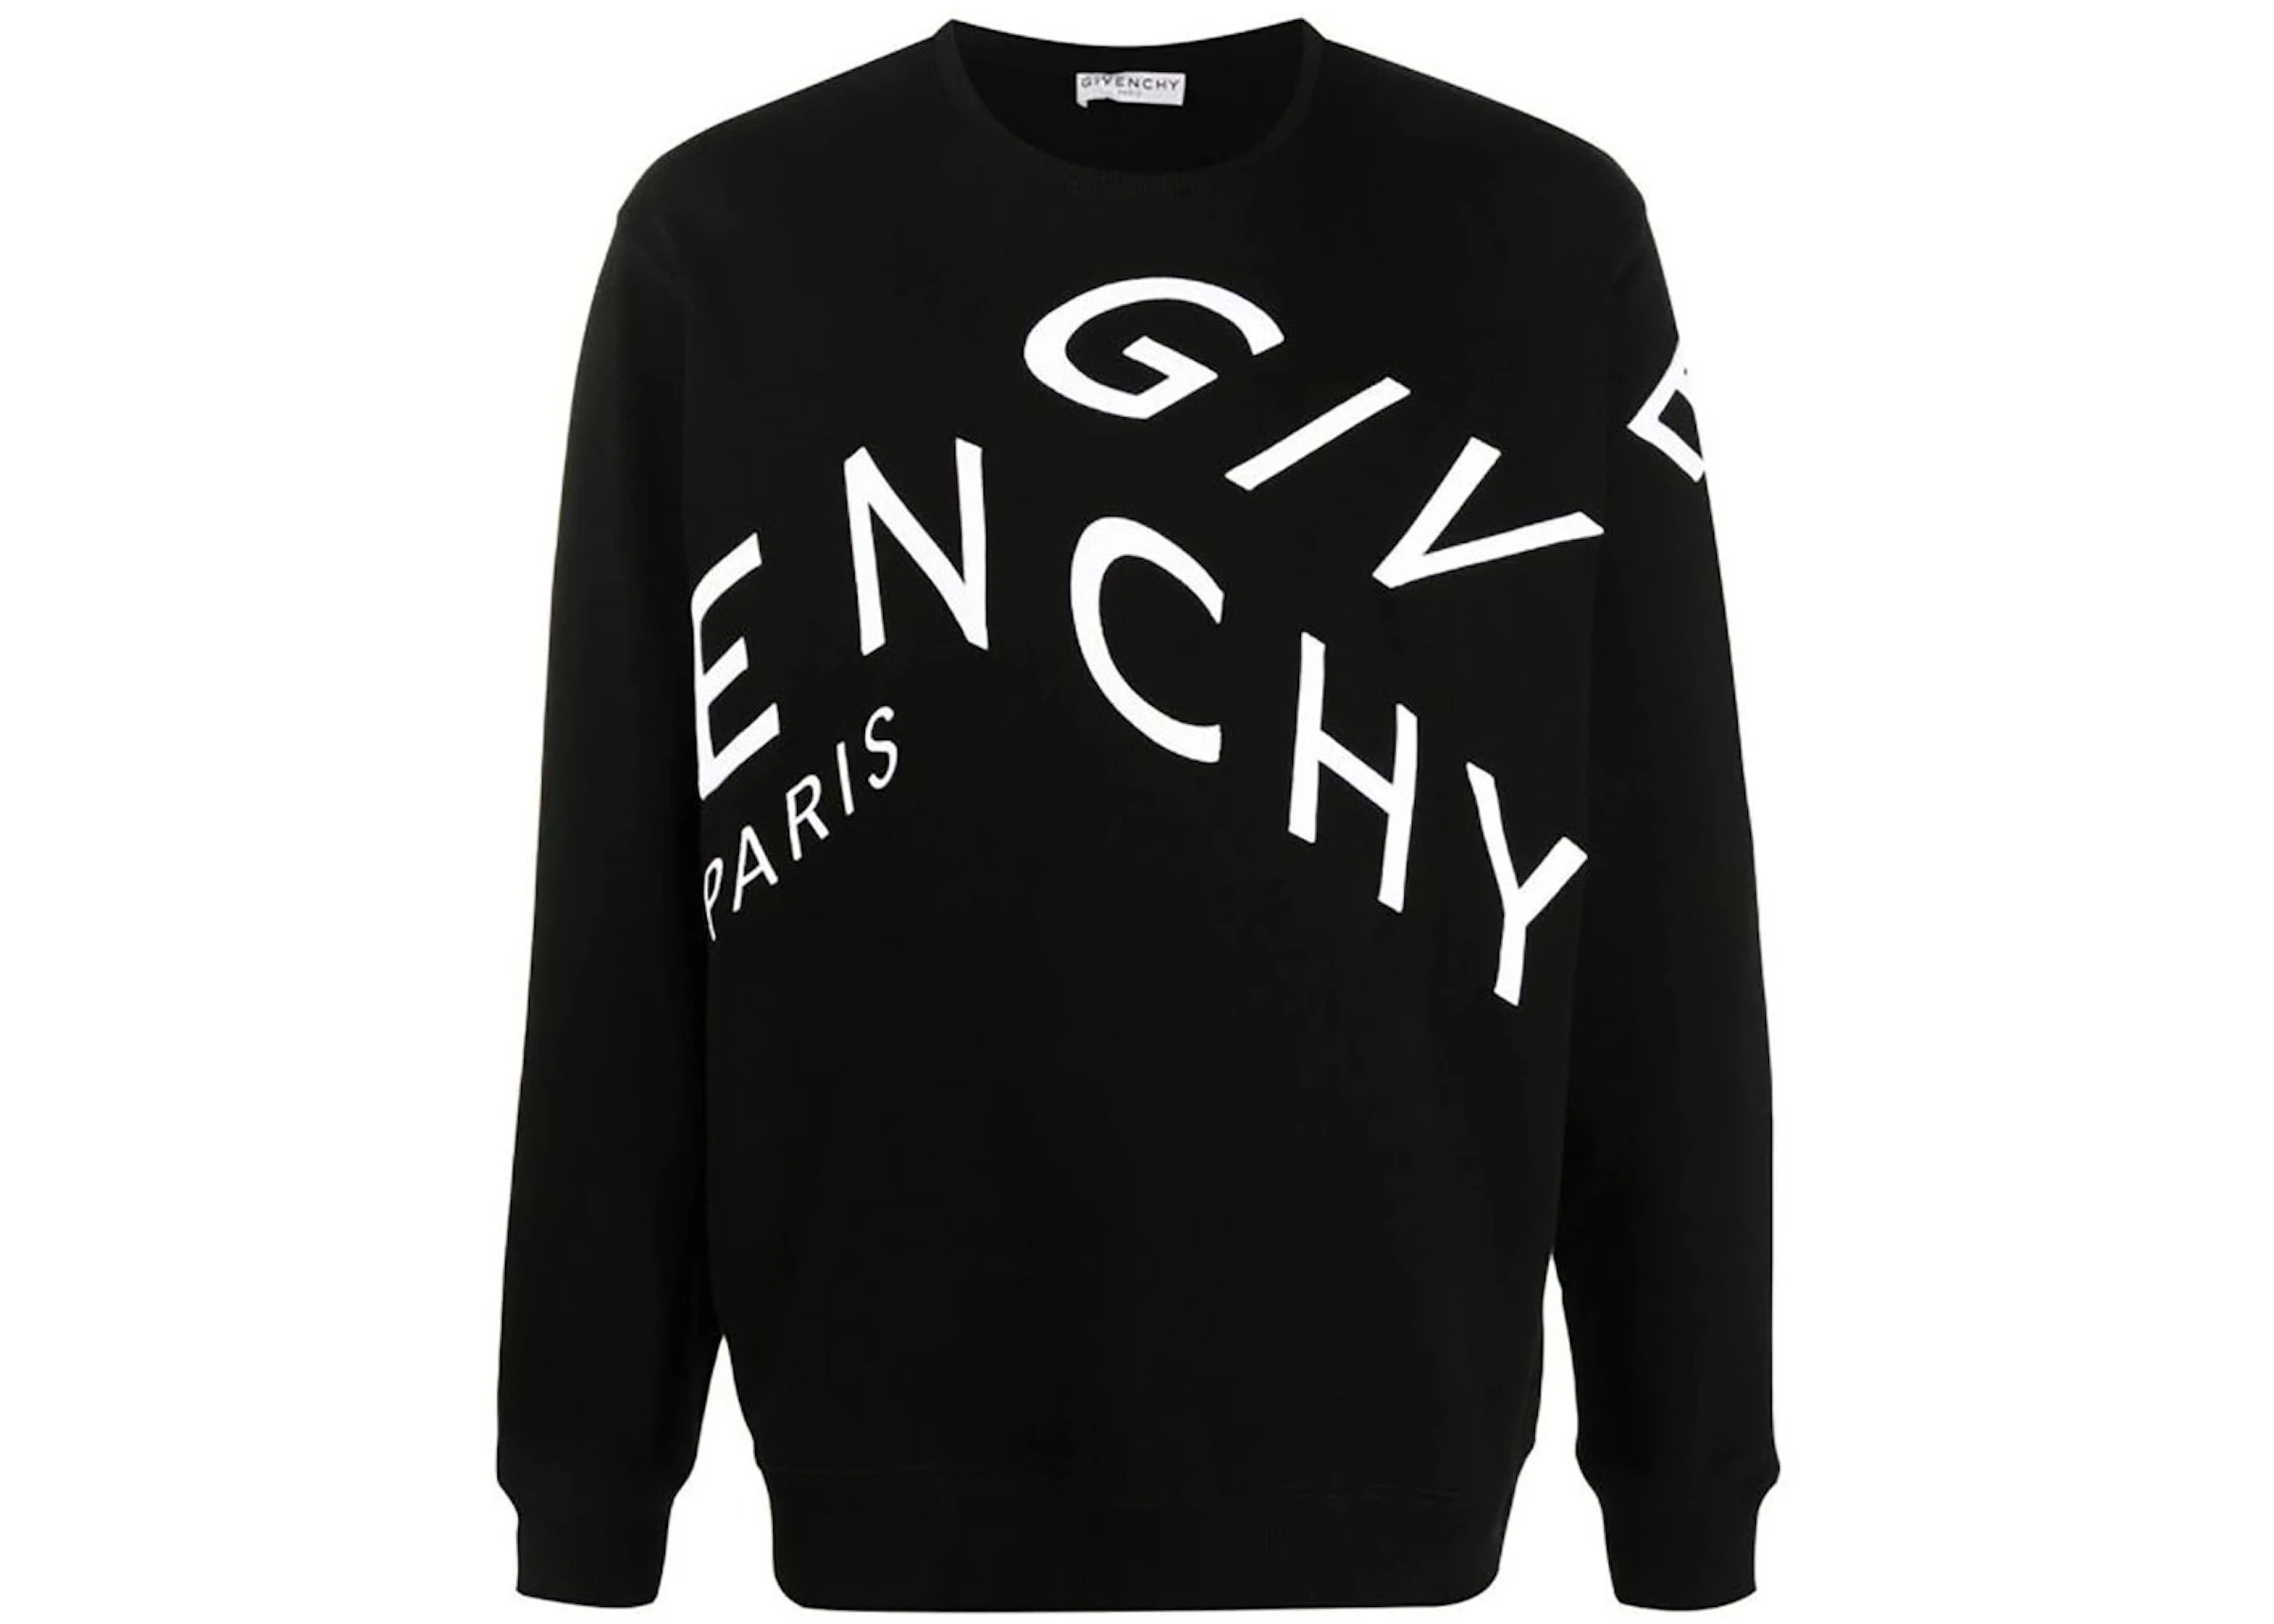 Givenchy Refracted Embroidered Logo Crewneck Black/White - US